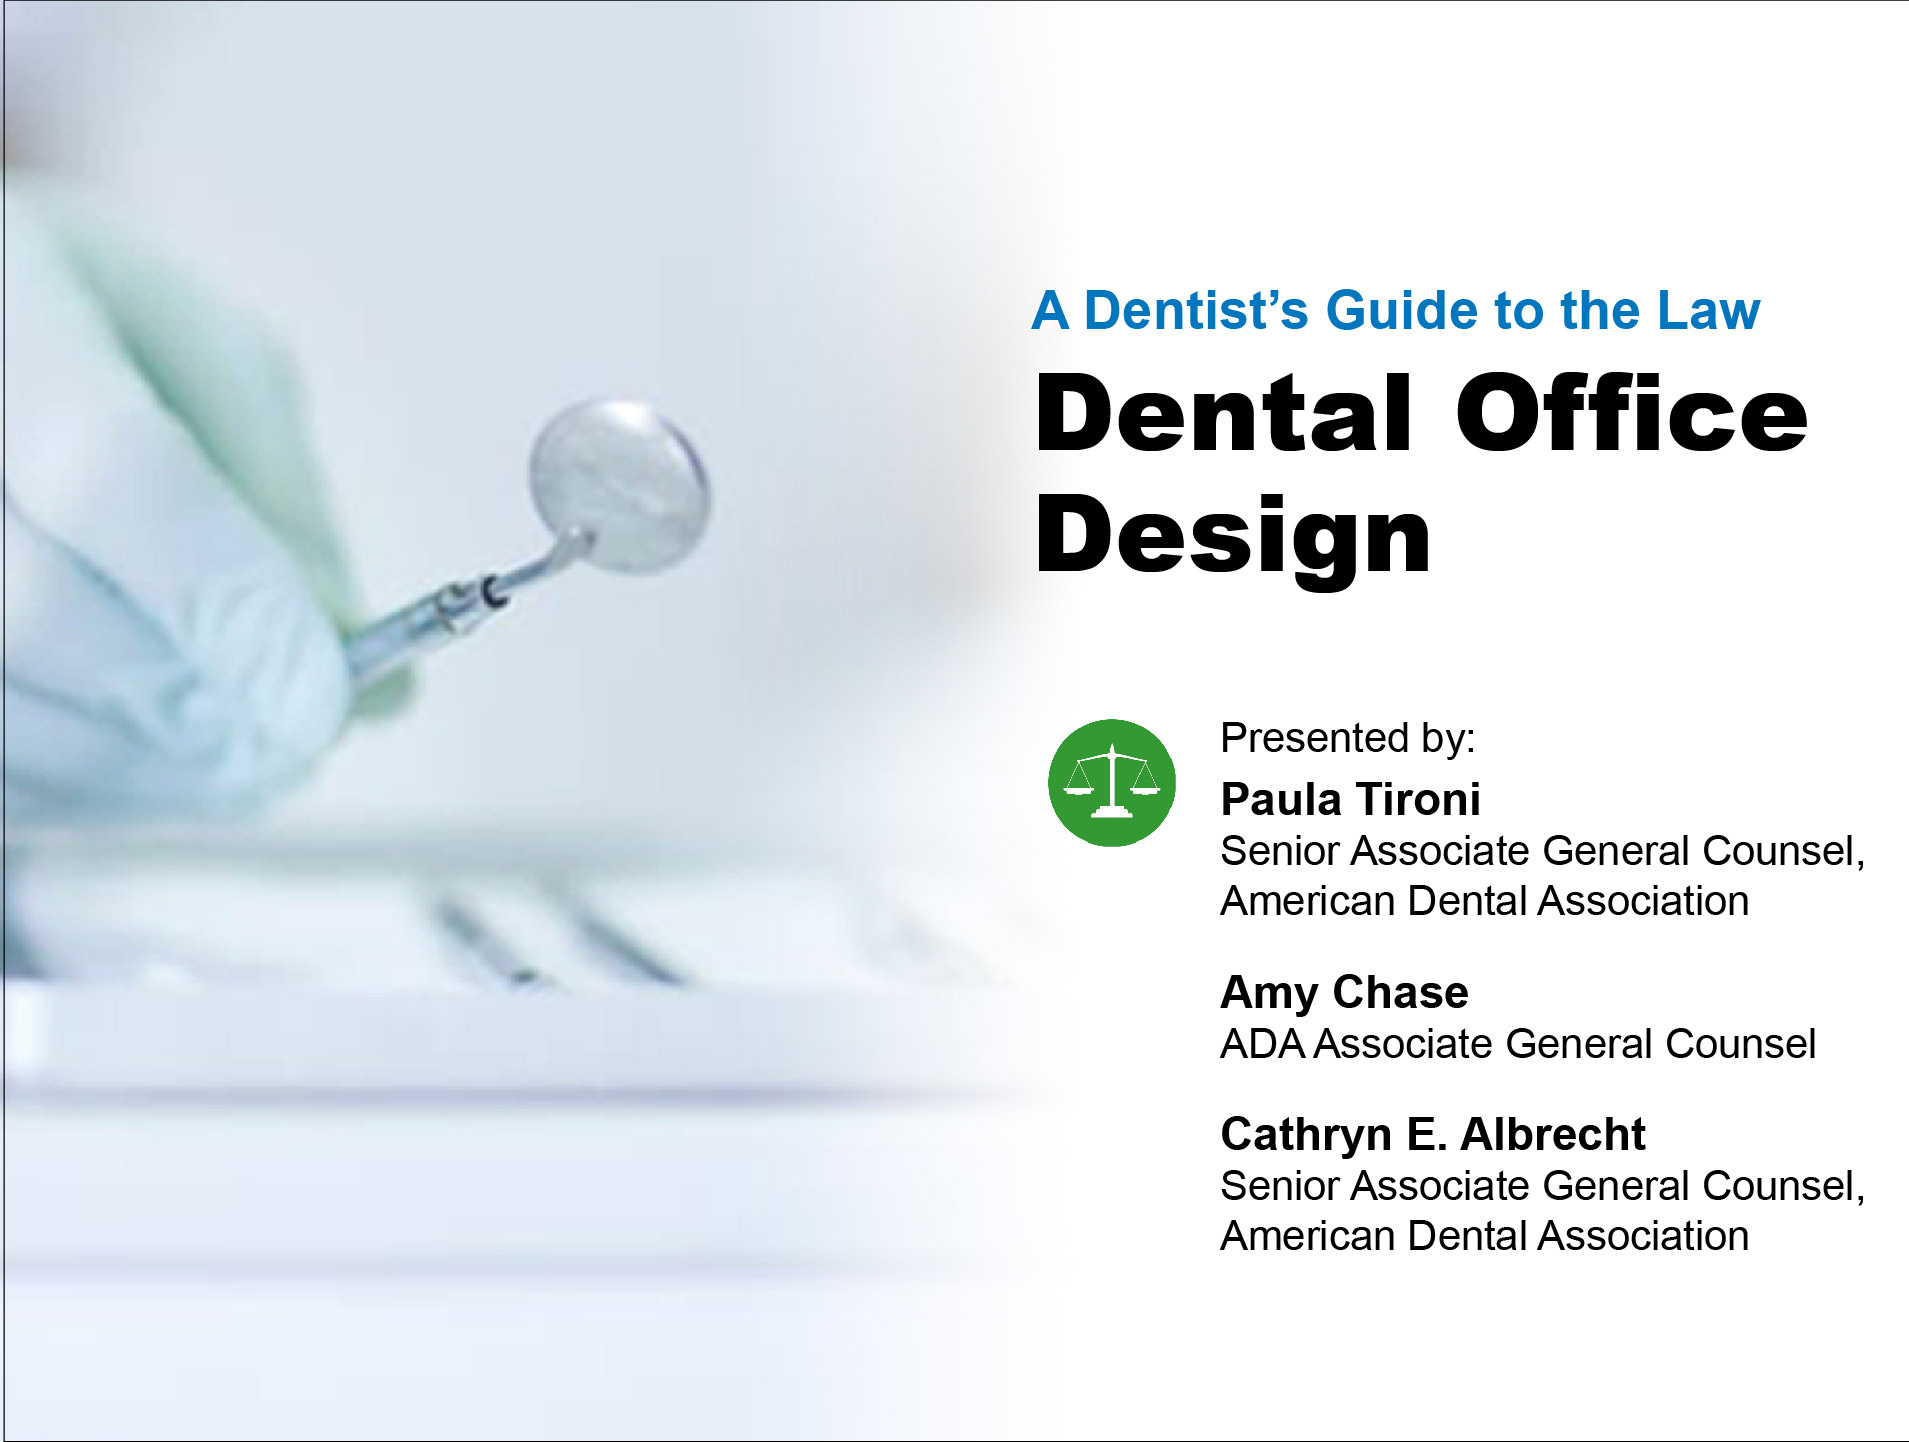 Dental Office Design (A Dentist's Guide to the Law Series)